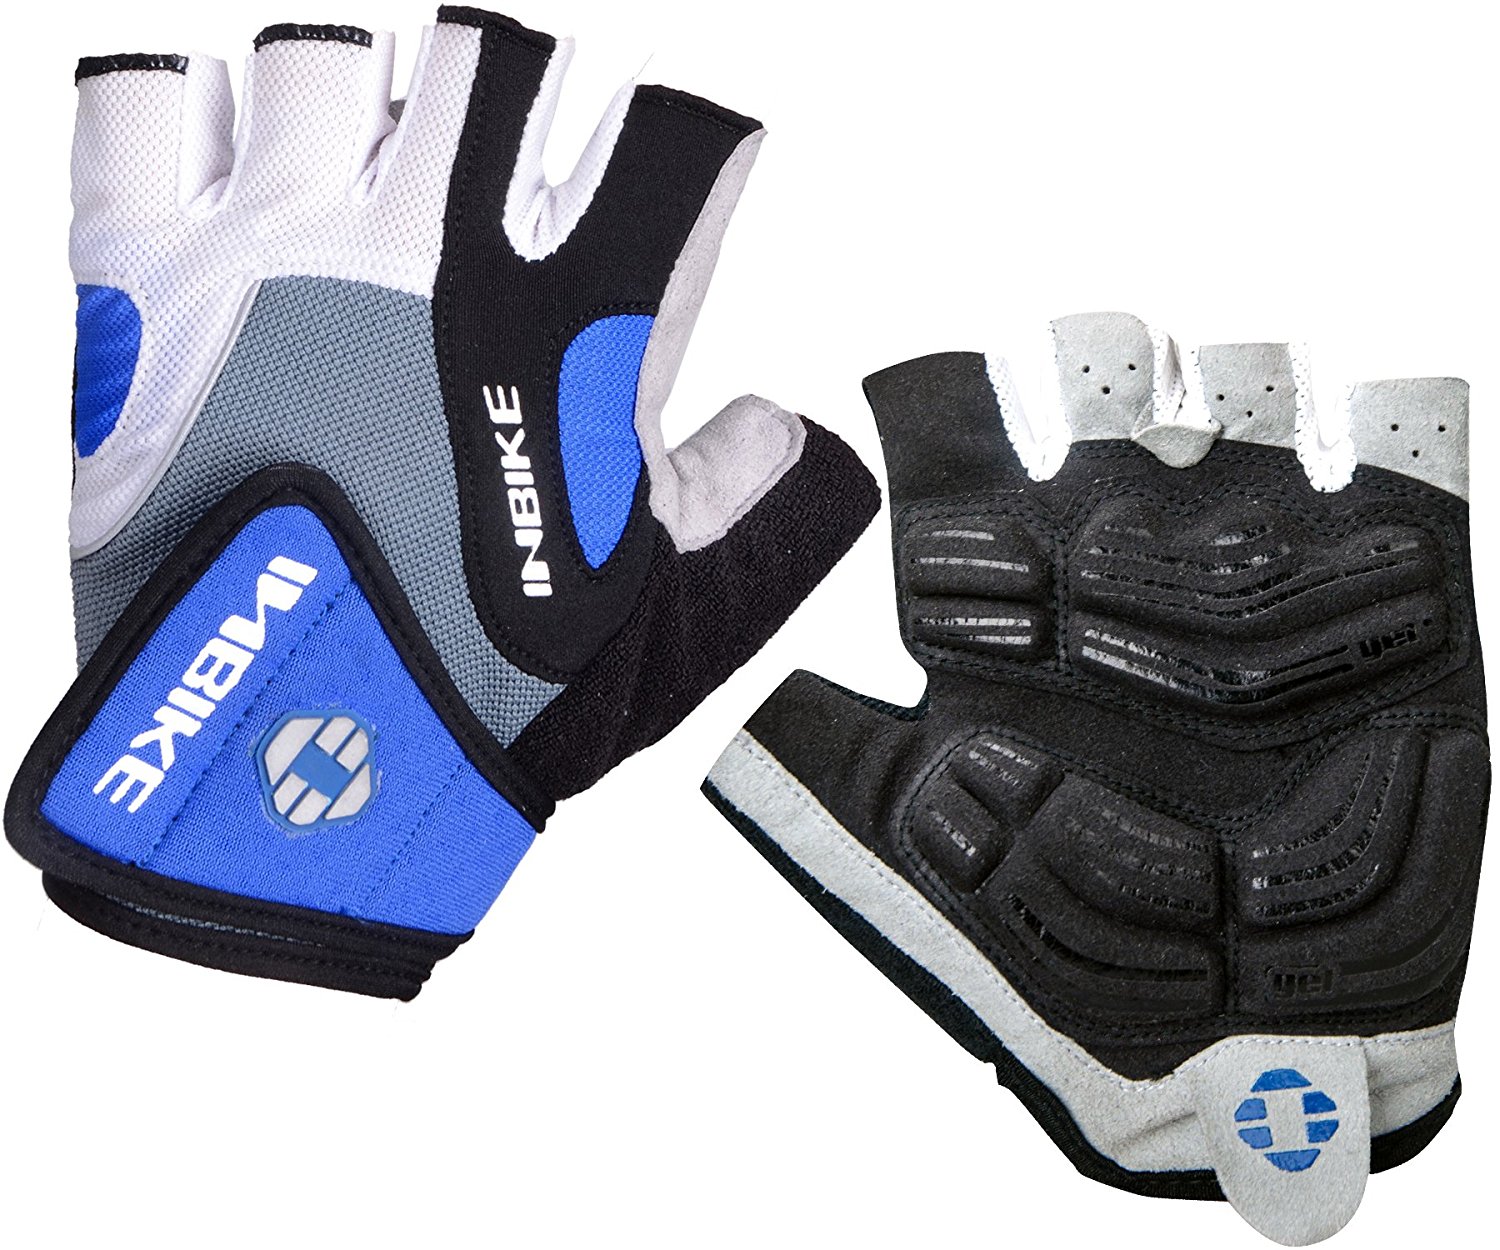 Best Cycling Short Gloves